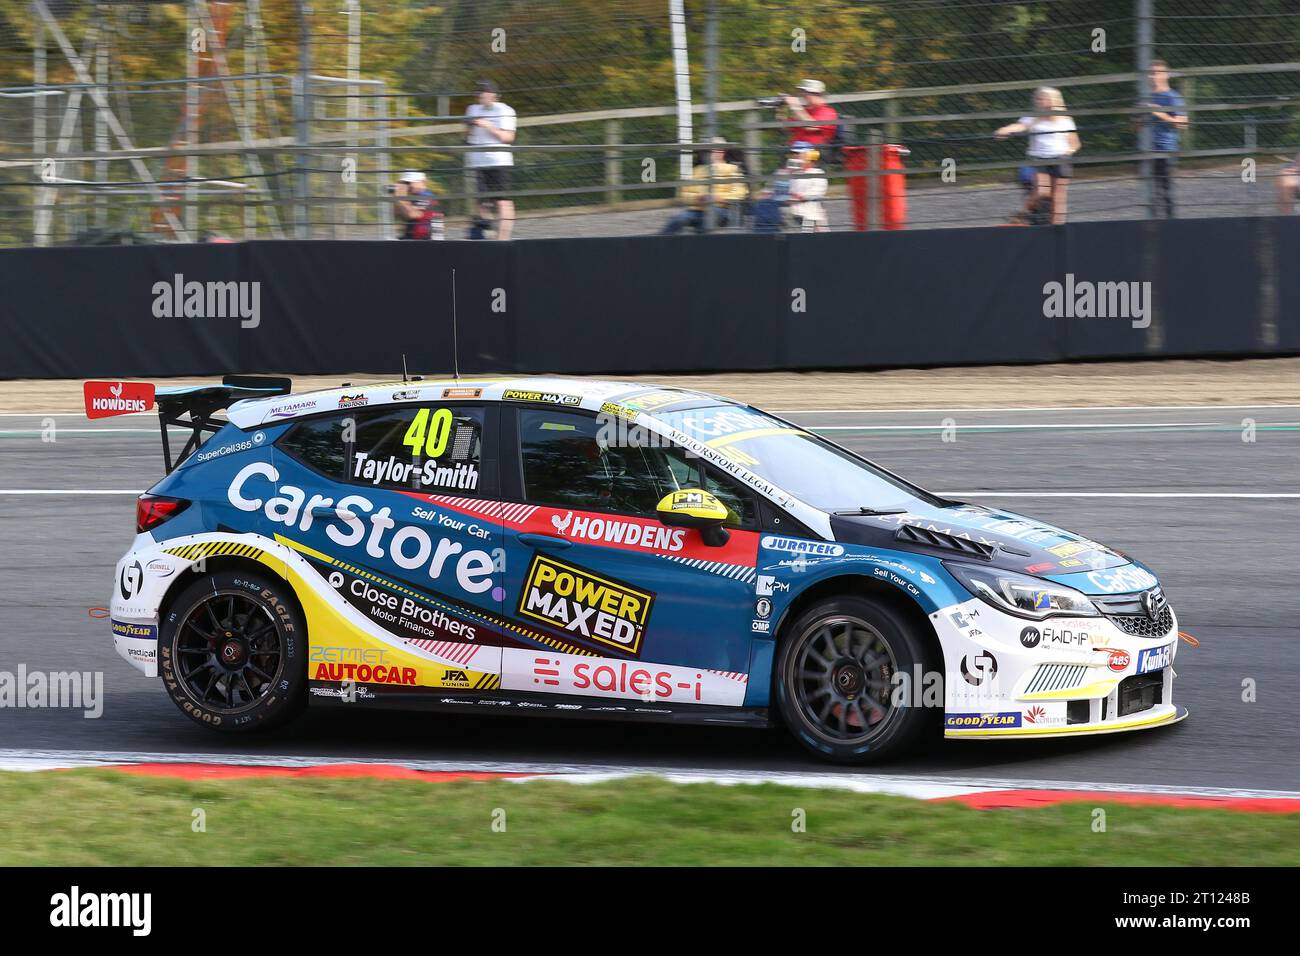 Aron Taylor-Smith - Carstore Power Maxed Racing -  driving Vauxhall Astra number 40 in the 2023 BTCC at Brands Hatch in October 2023 Stock Photo